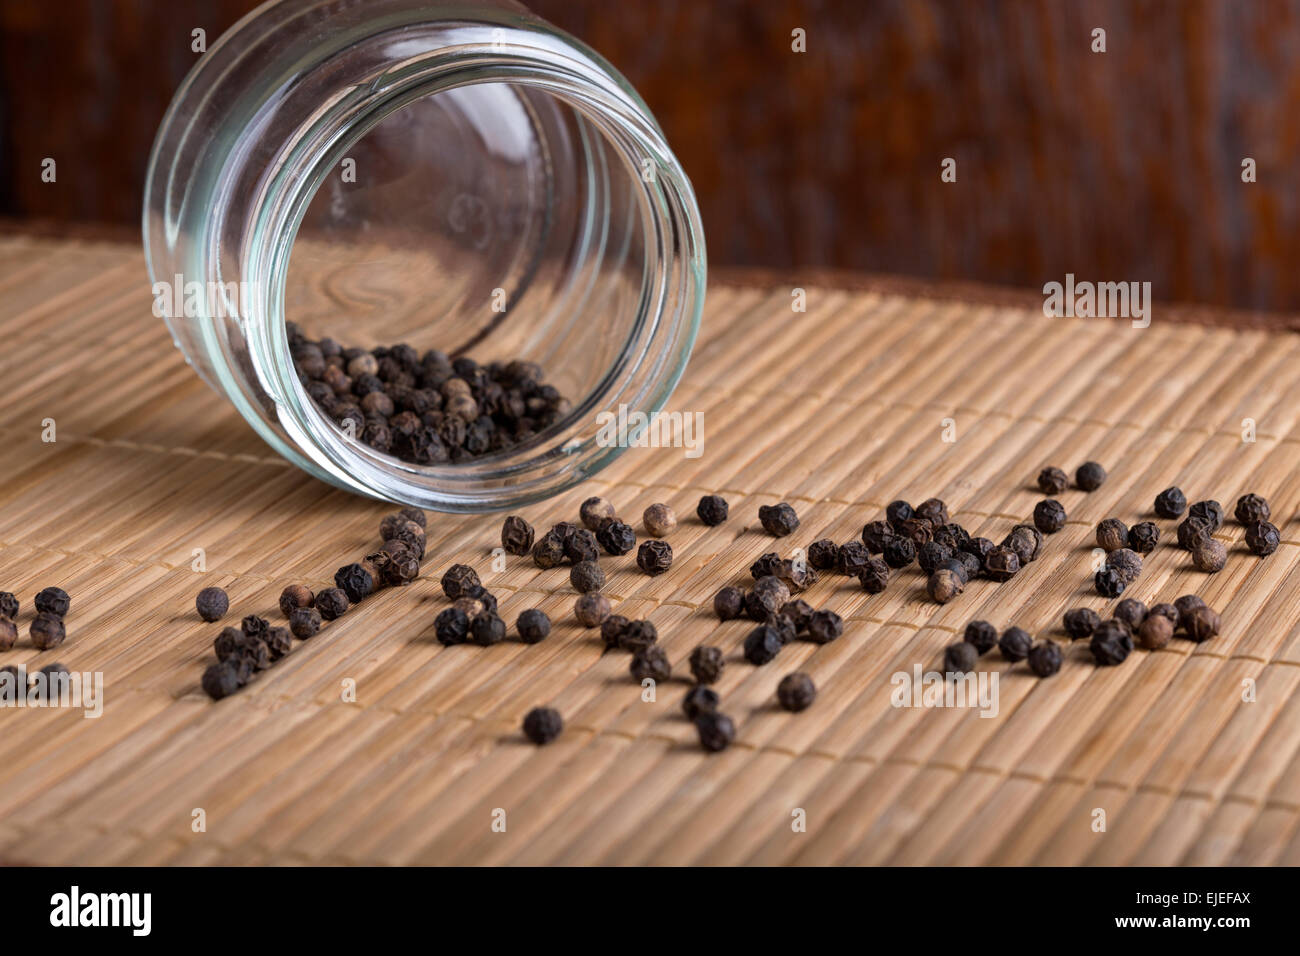 Black pepper in the inverted jar with glass on wooden background Stock Photo